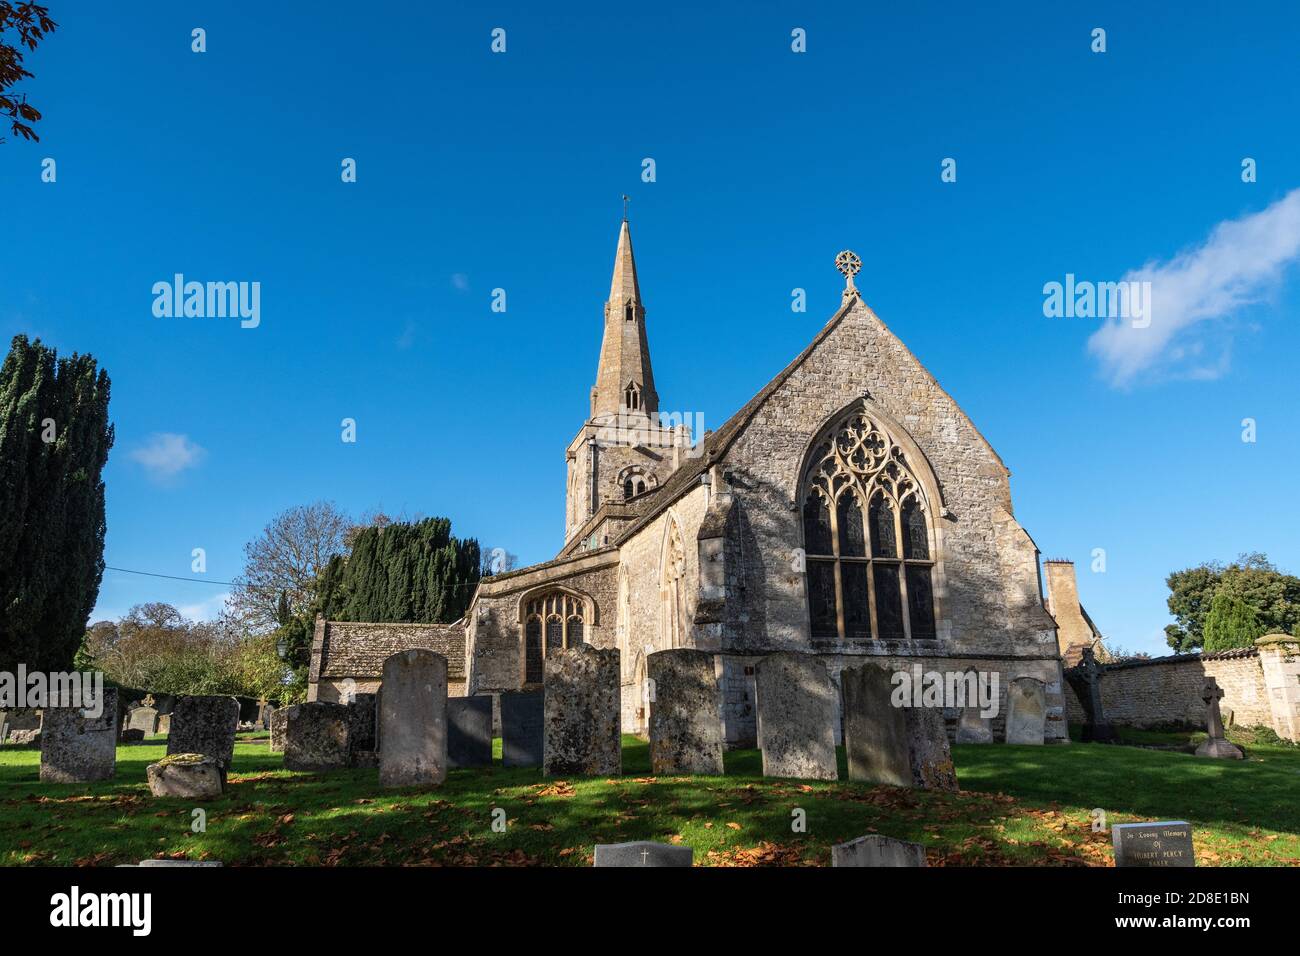 The church of St James in the village of Grafton Underwood, Northamptonshire, UK; earliest parts date from 12th century. Stock Photo